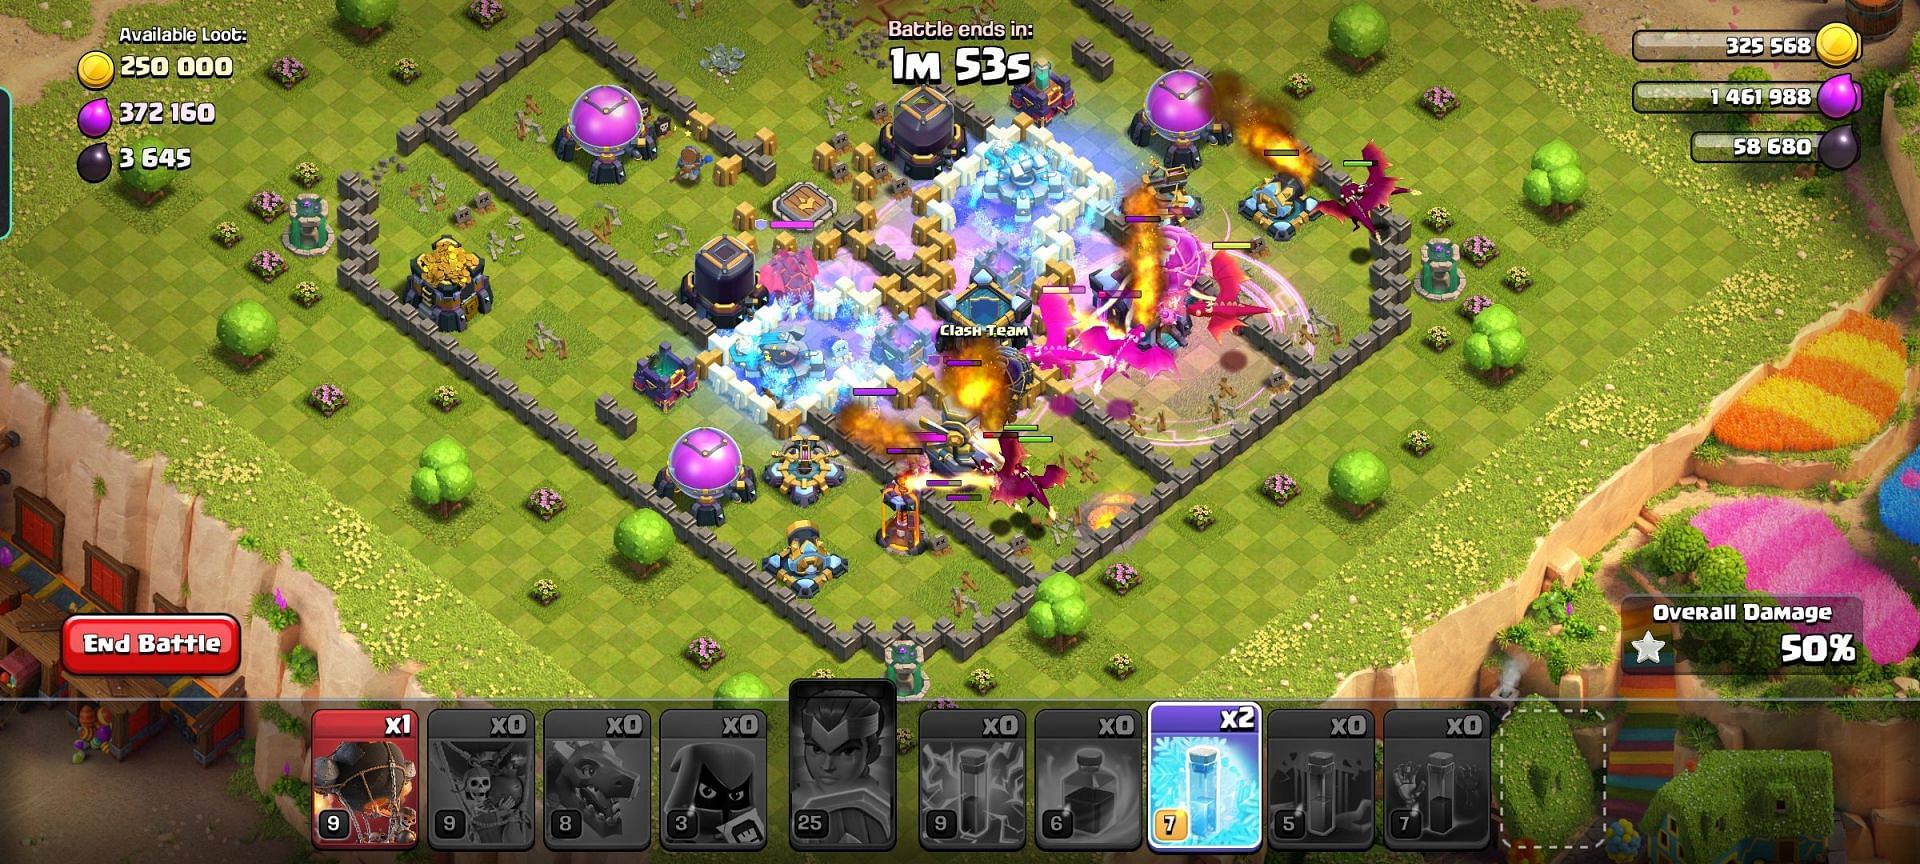 Using Dragons and Balloons (Image via Clash of Clans)